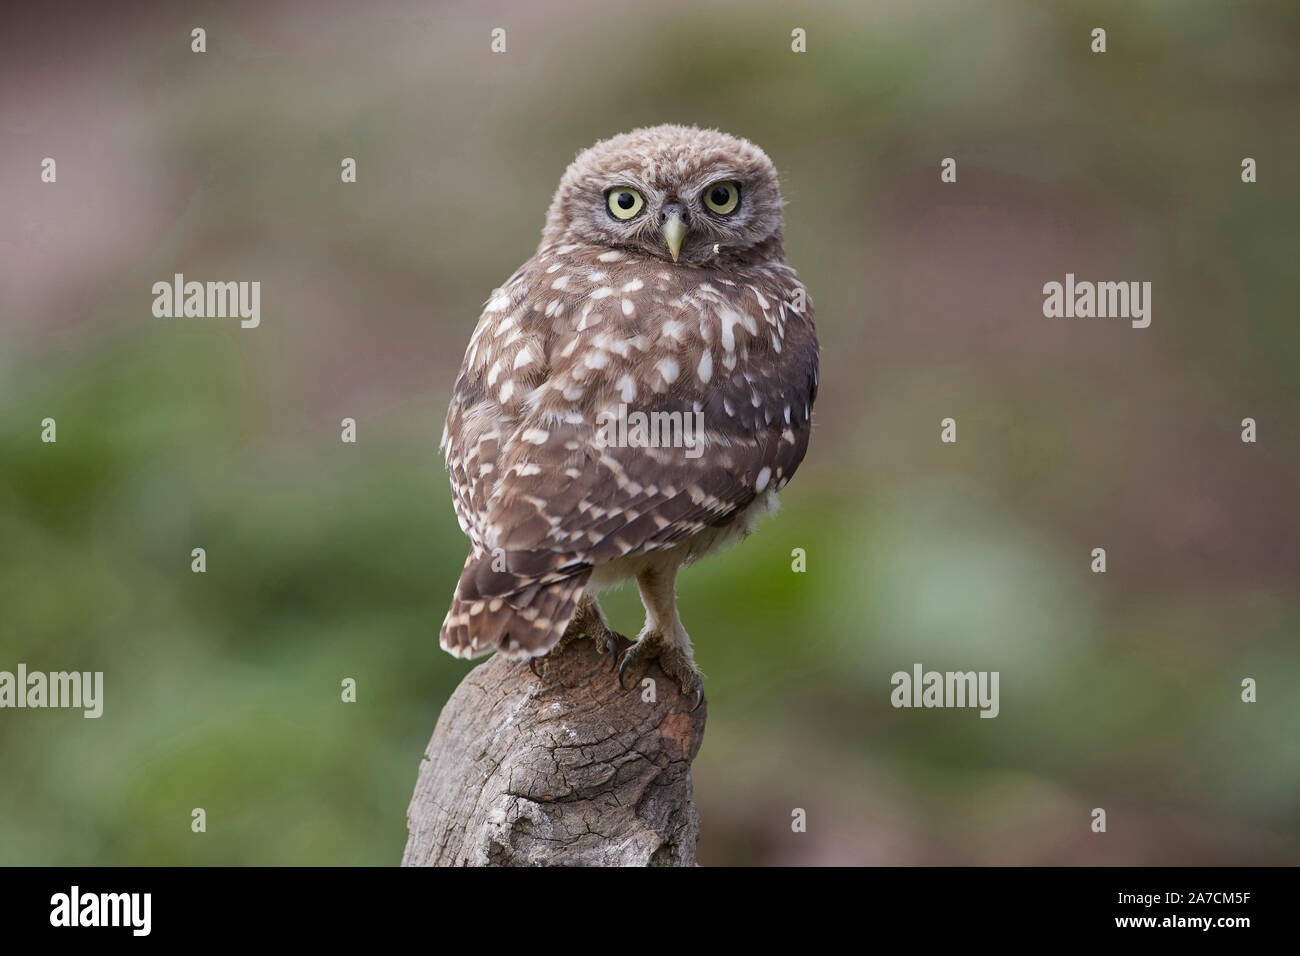 Liitle Owl owlet, Athene noctua on a perch after just fleding from the nest Stock Photo